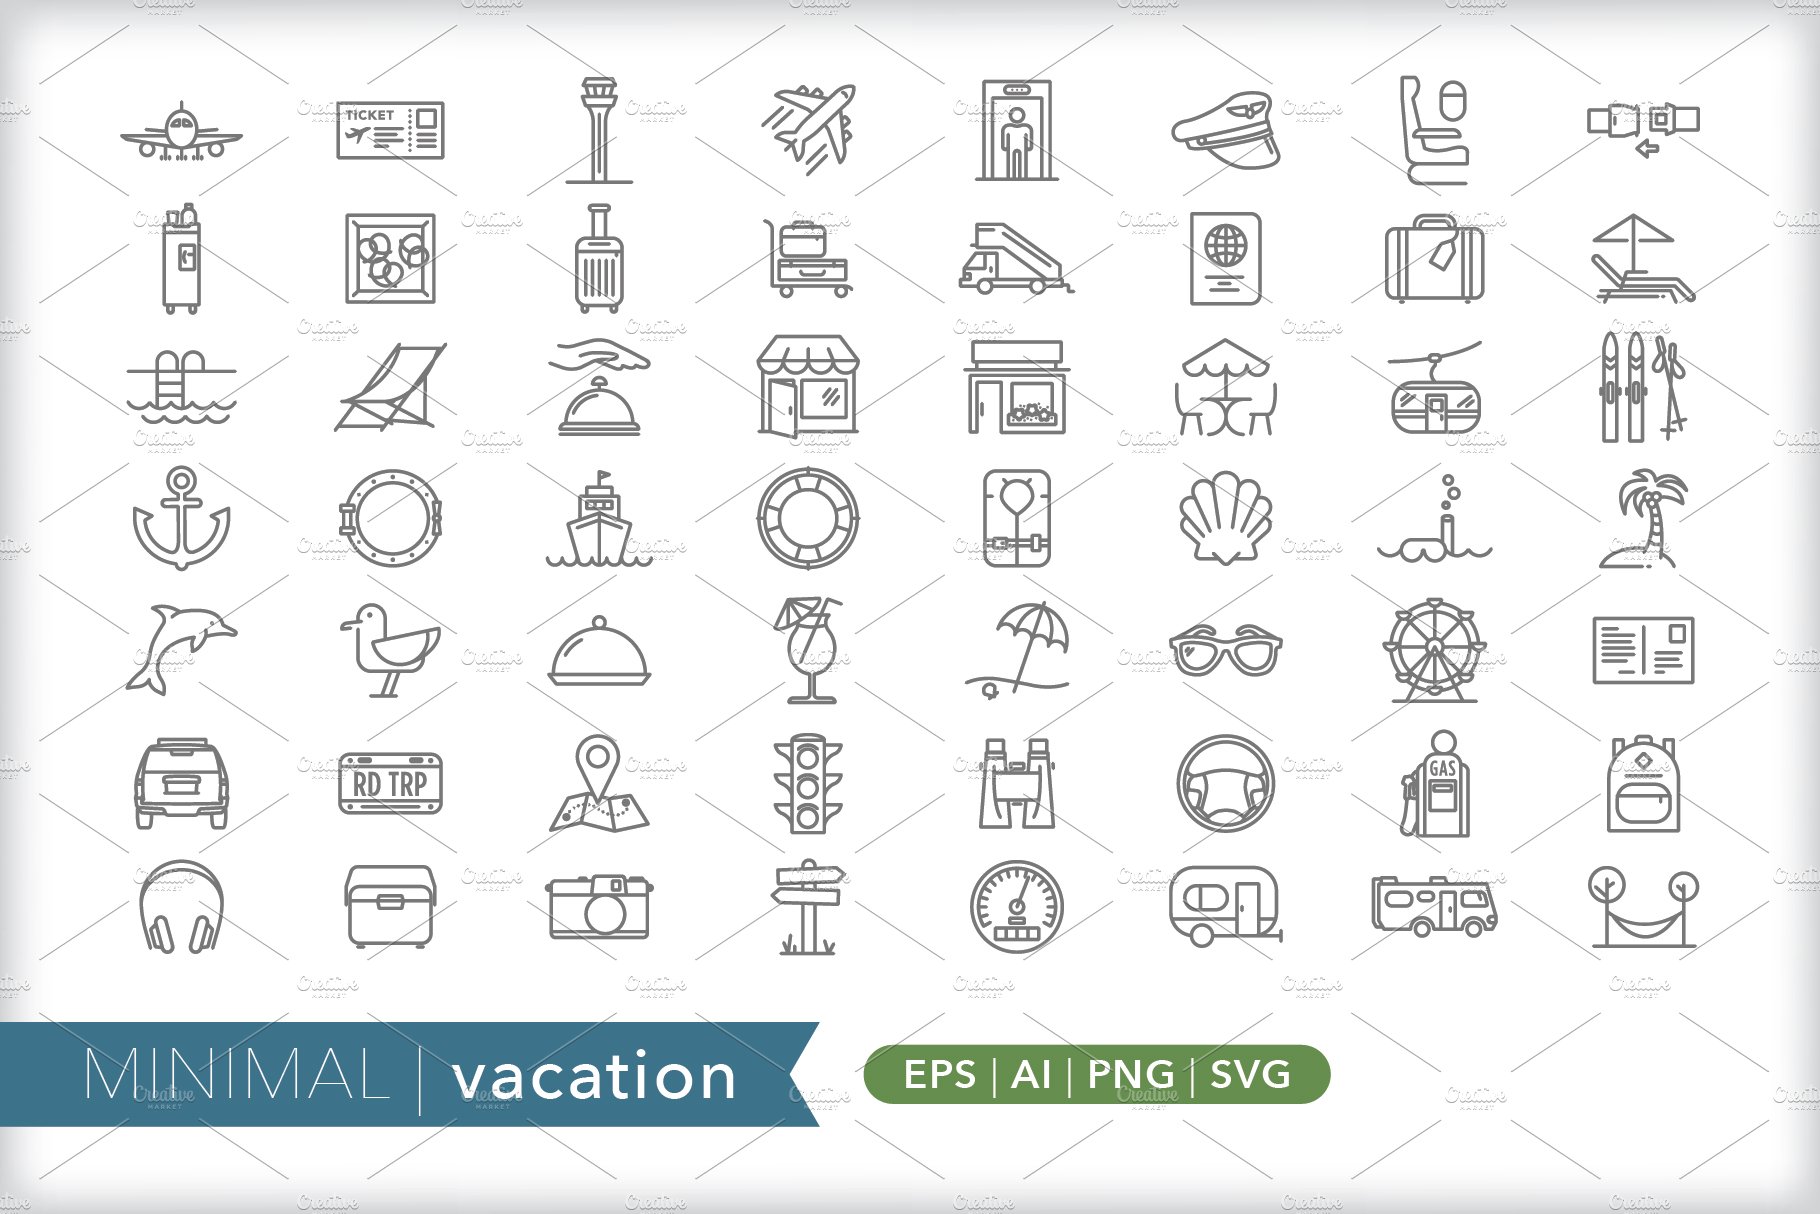 Minimal vacation icons cover image.